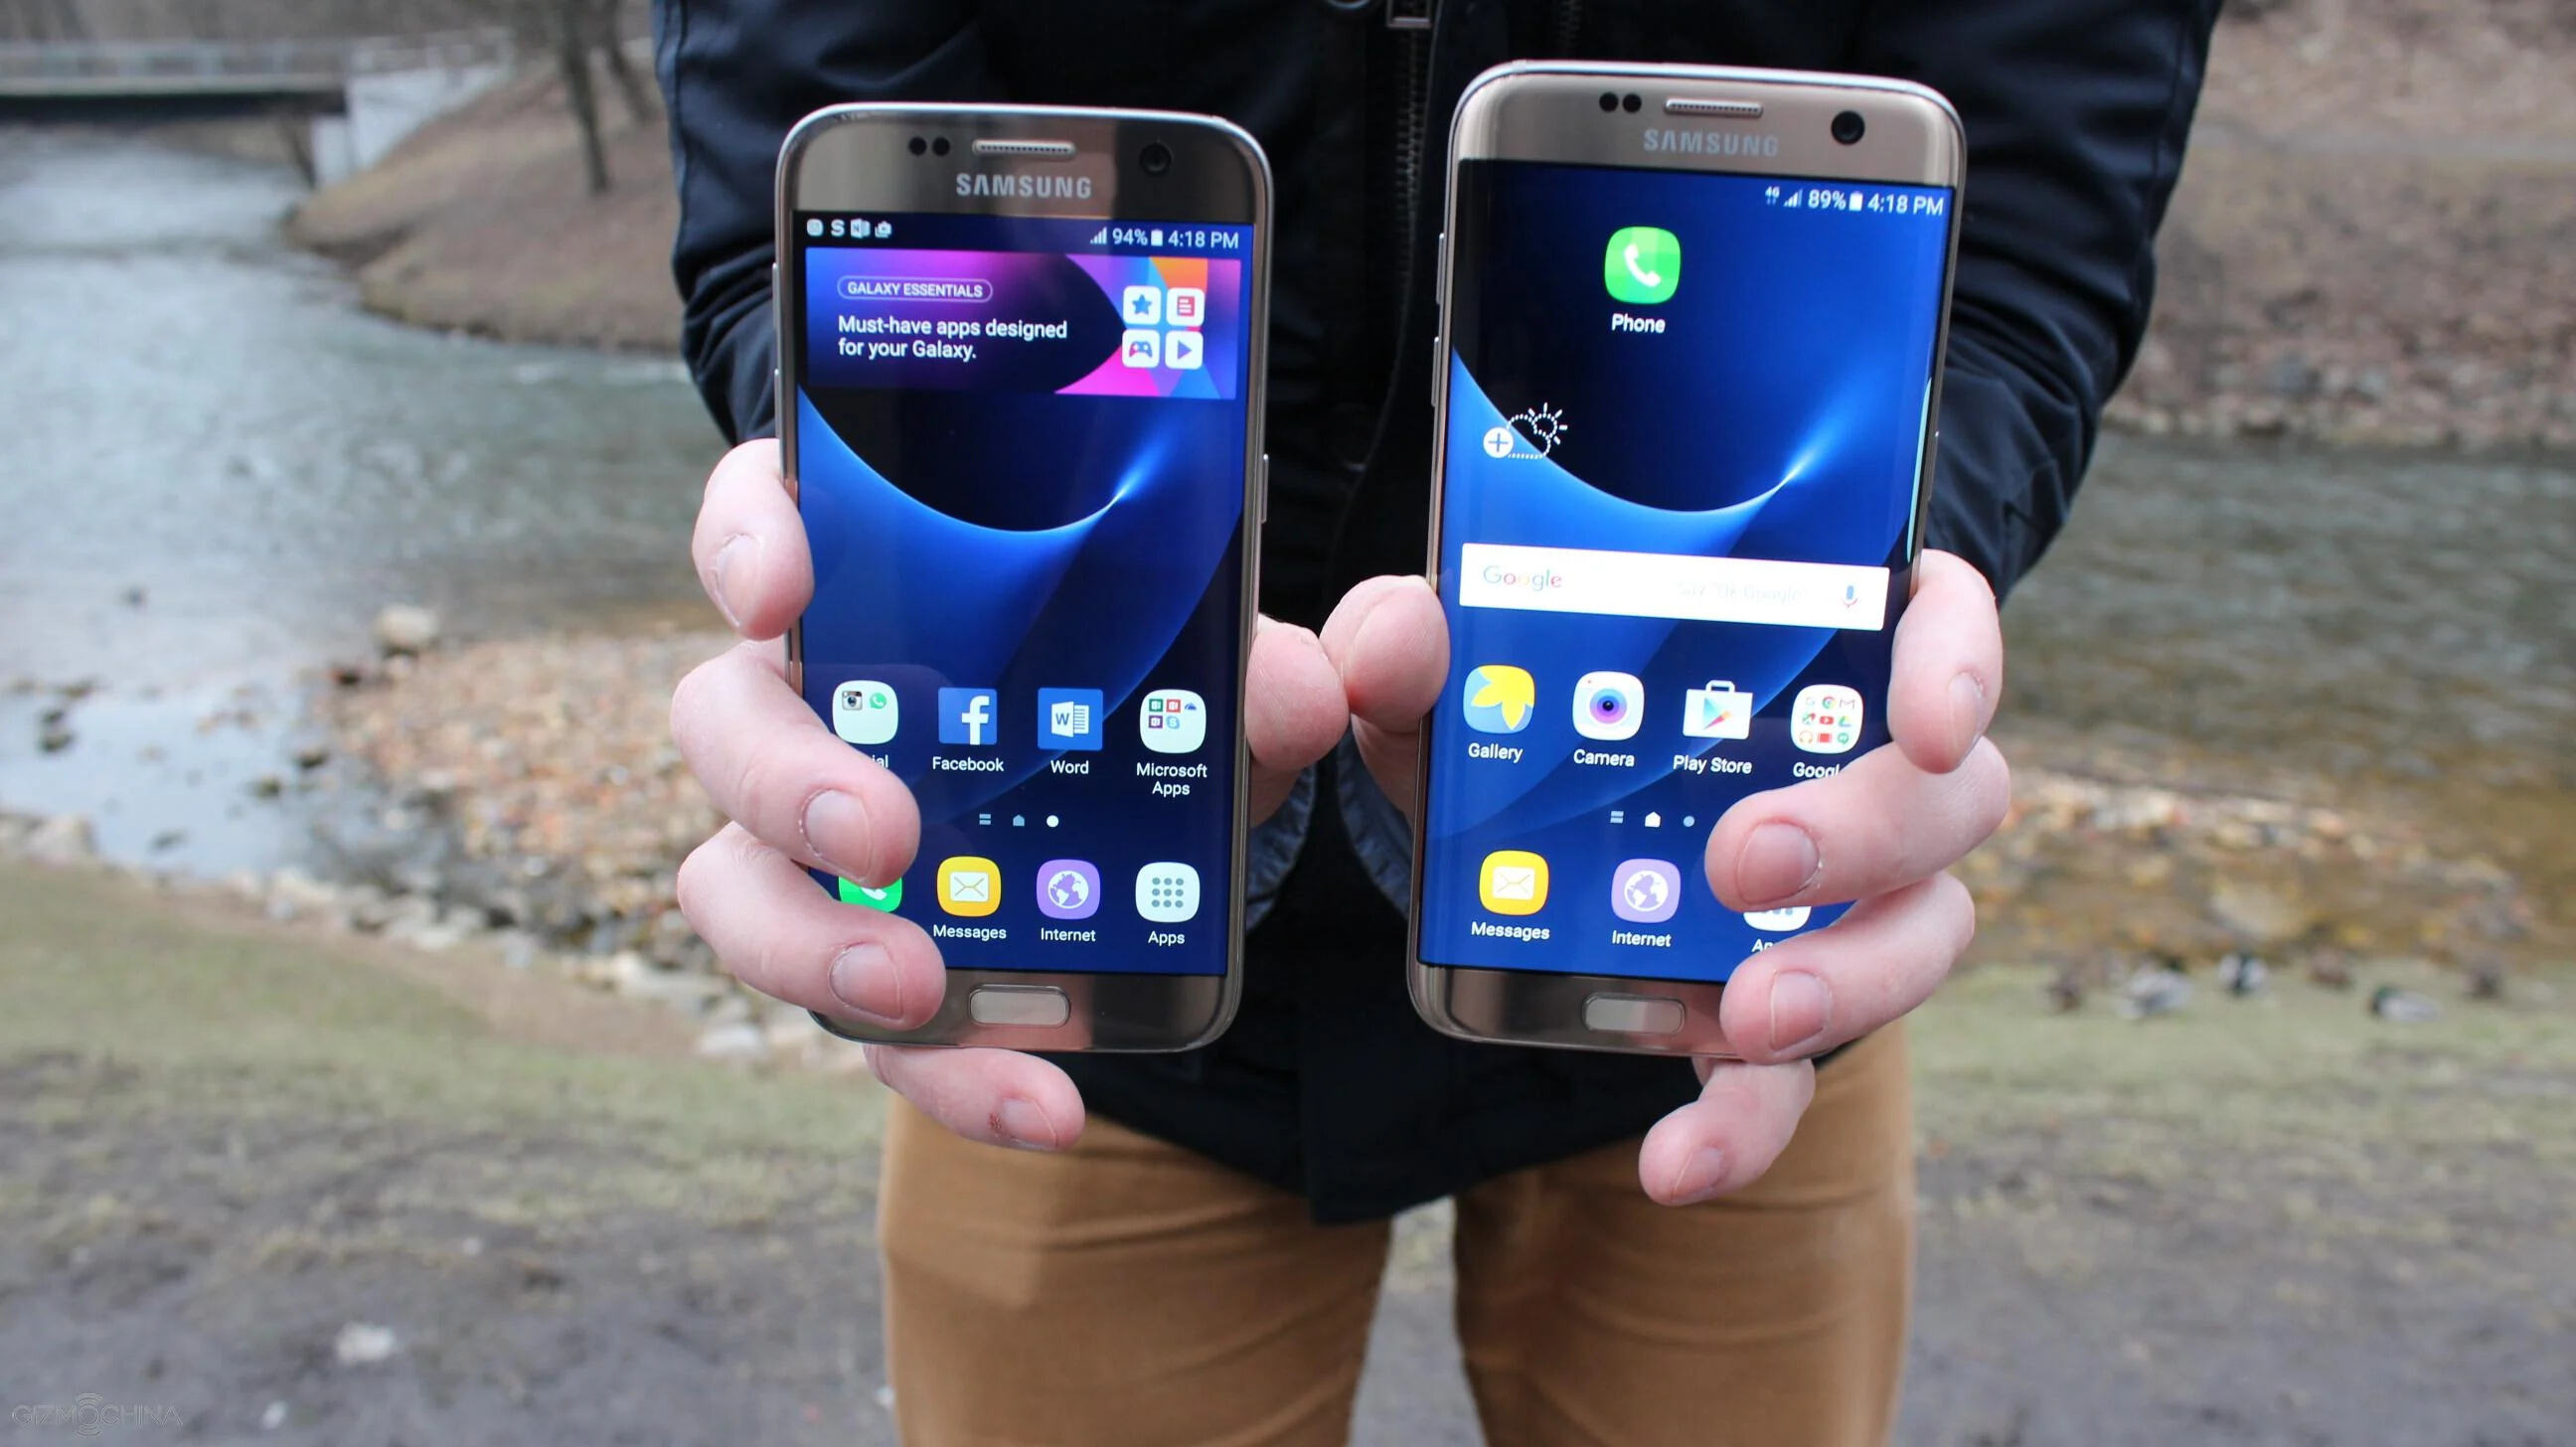 galaxy-s7-edge-was-the-top-selling-phone-in-early-2016